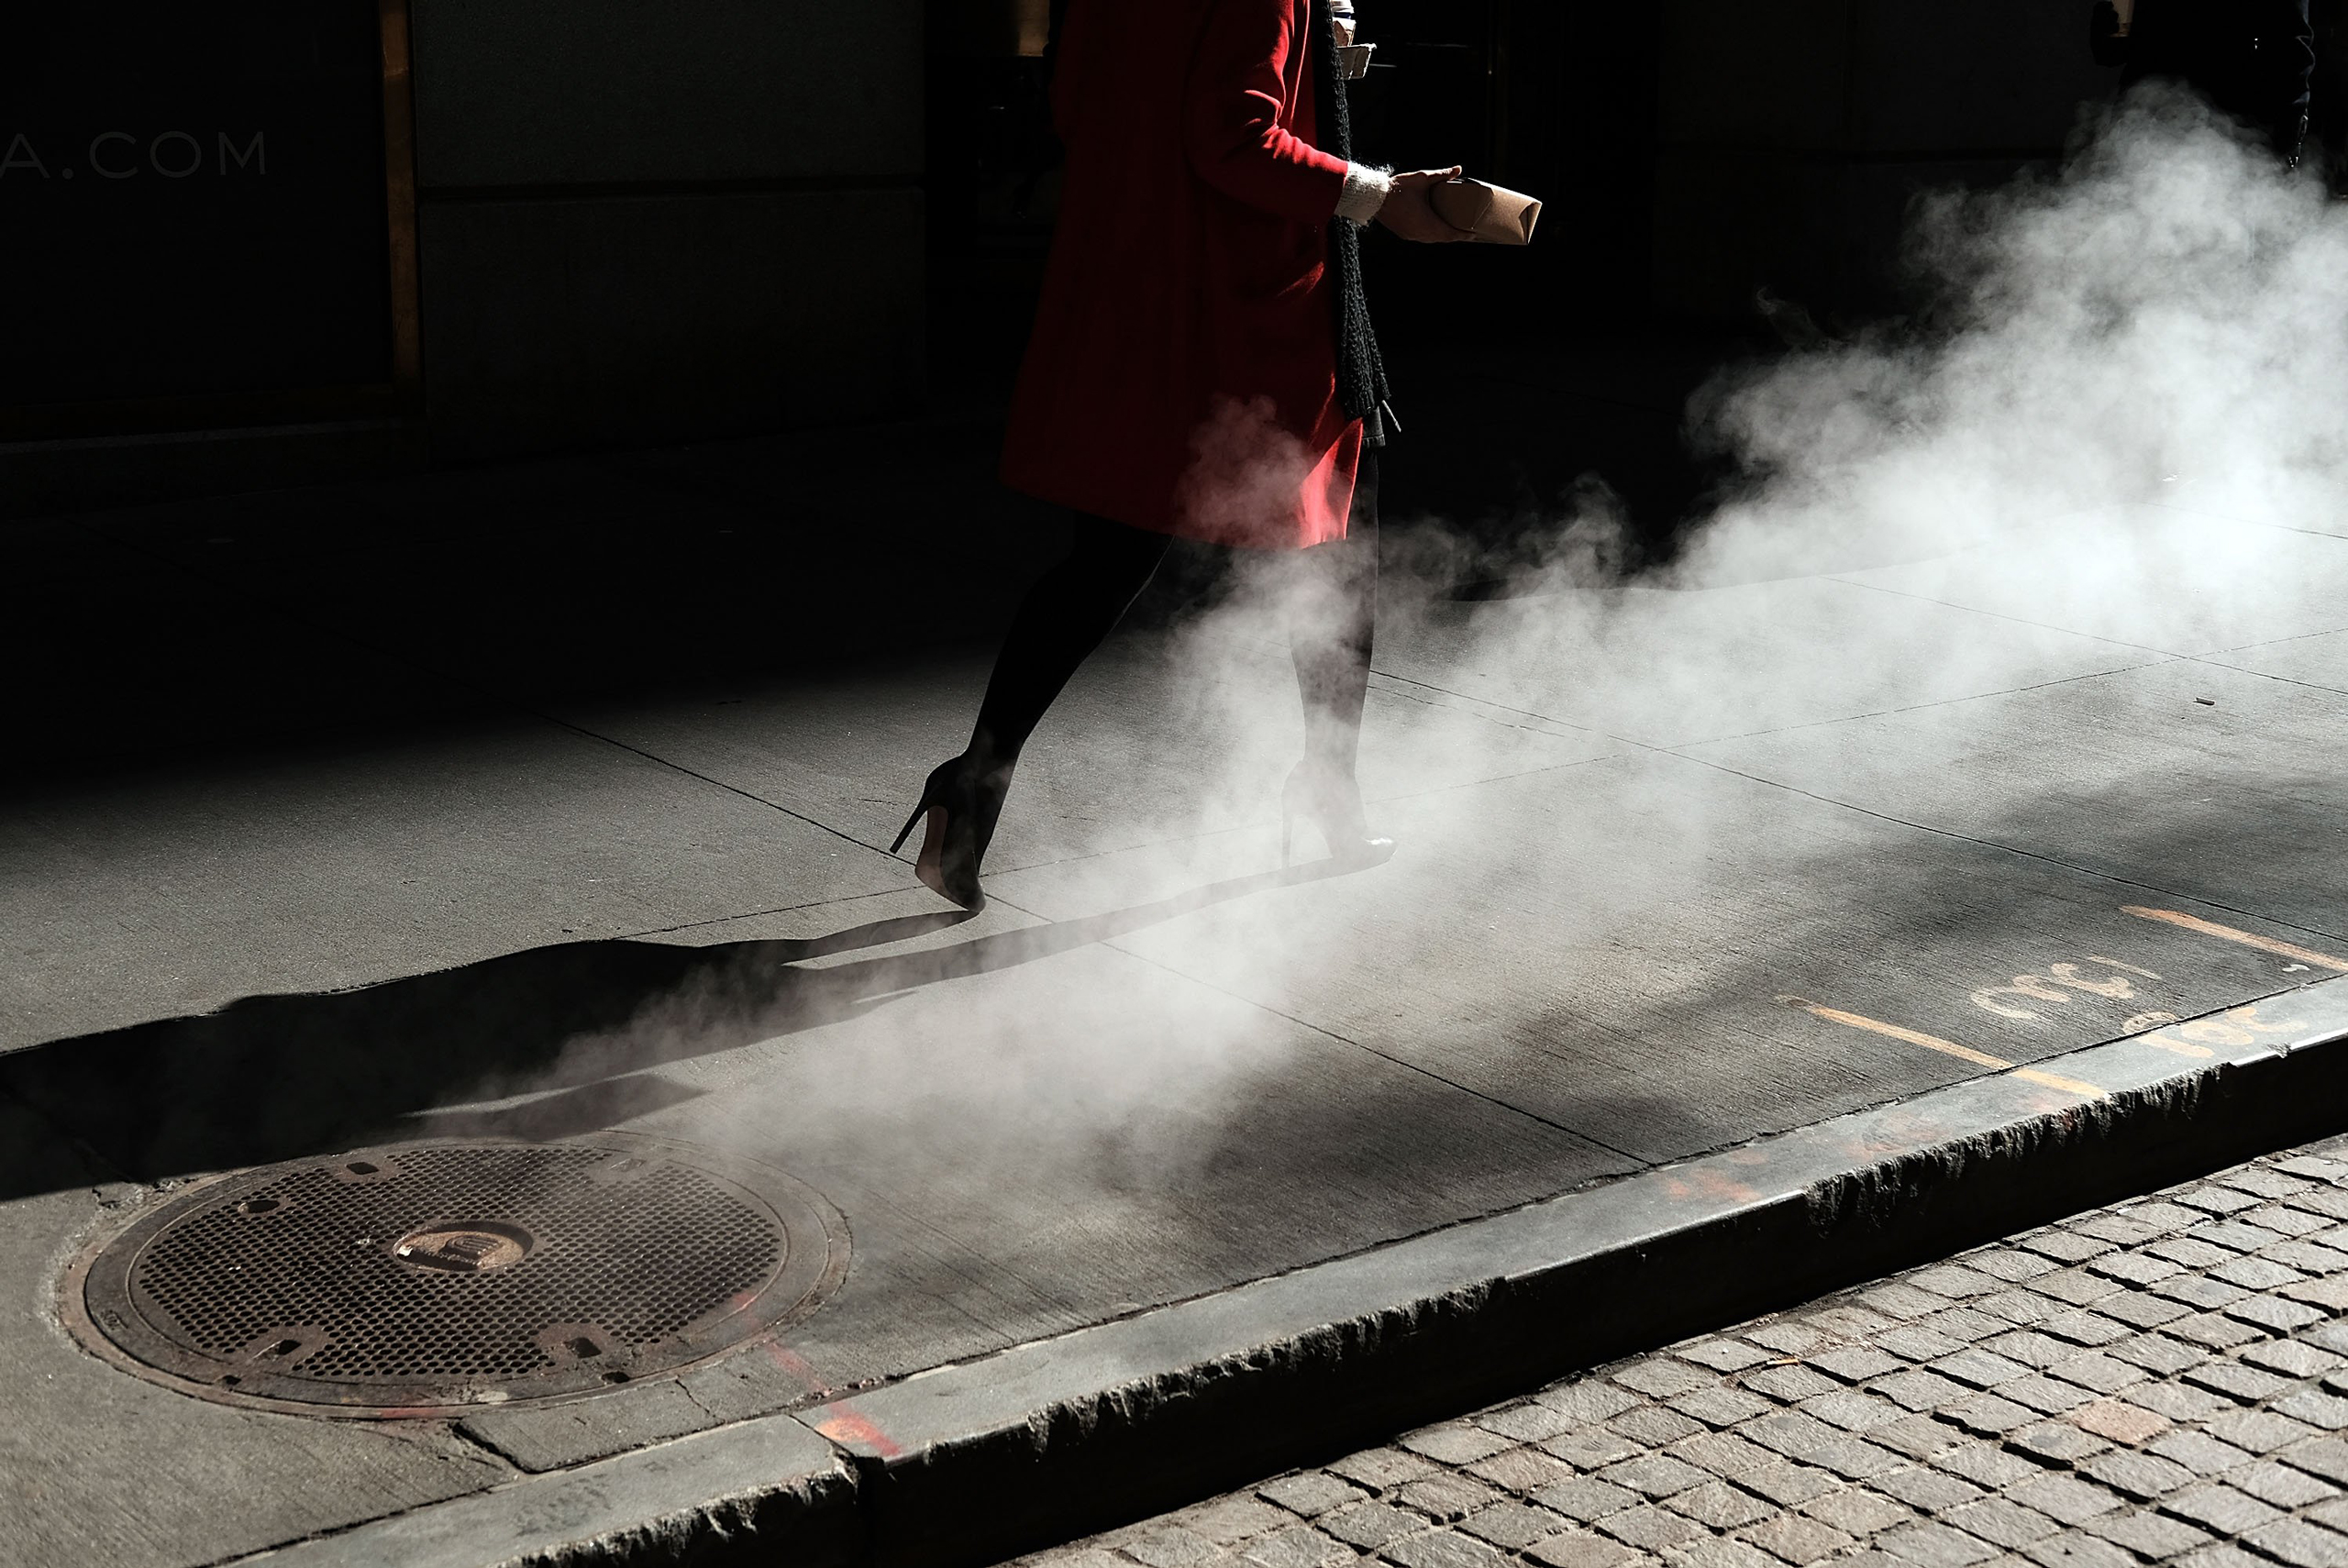 A woman walks by the New York Stock Exchange near Wall Street, in New York City, on March 21, 2016. (Spencer Platt—Getty Images)